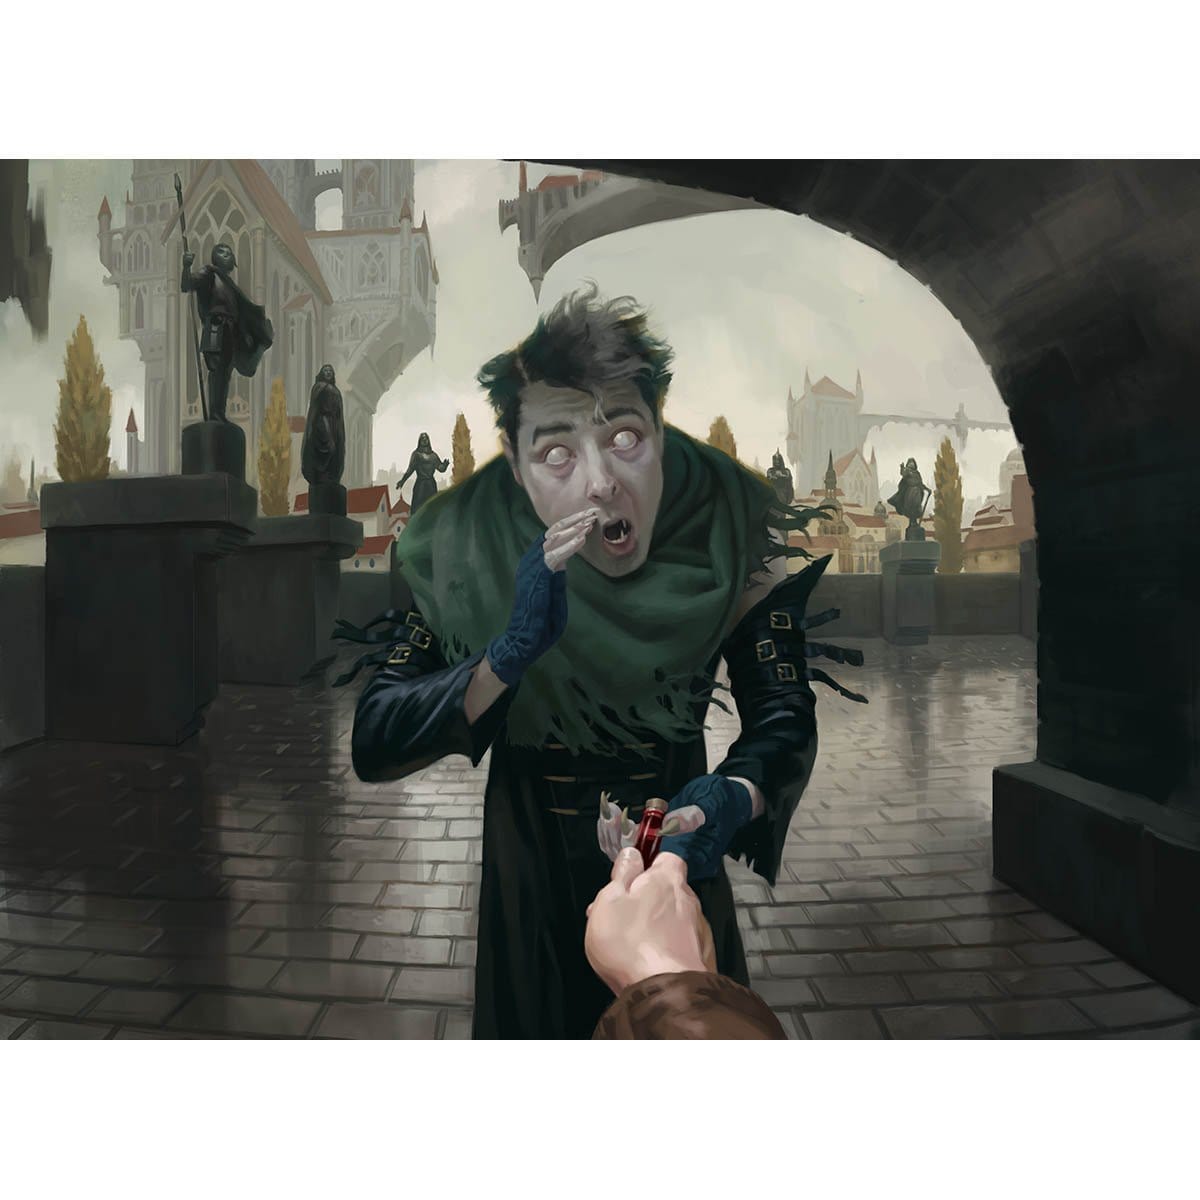 Whispering Snitch Print - Print - Original Magic Art - Accessories for Magic the Gathering and other card games